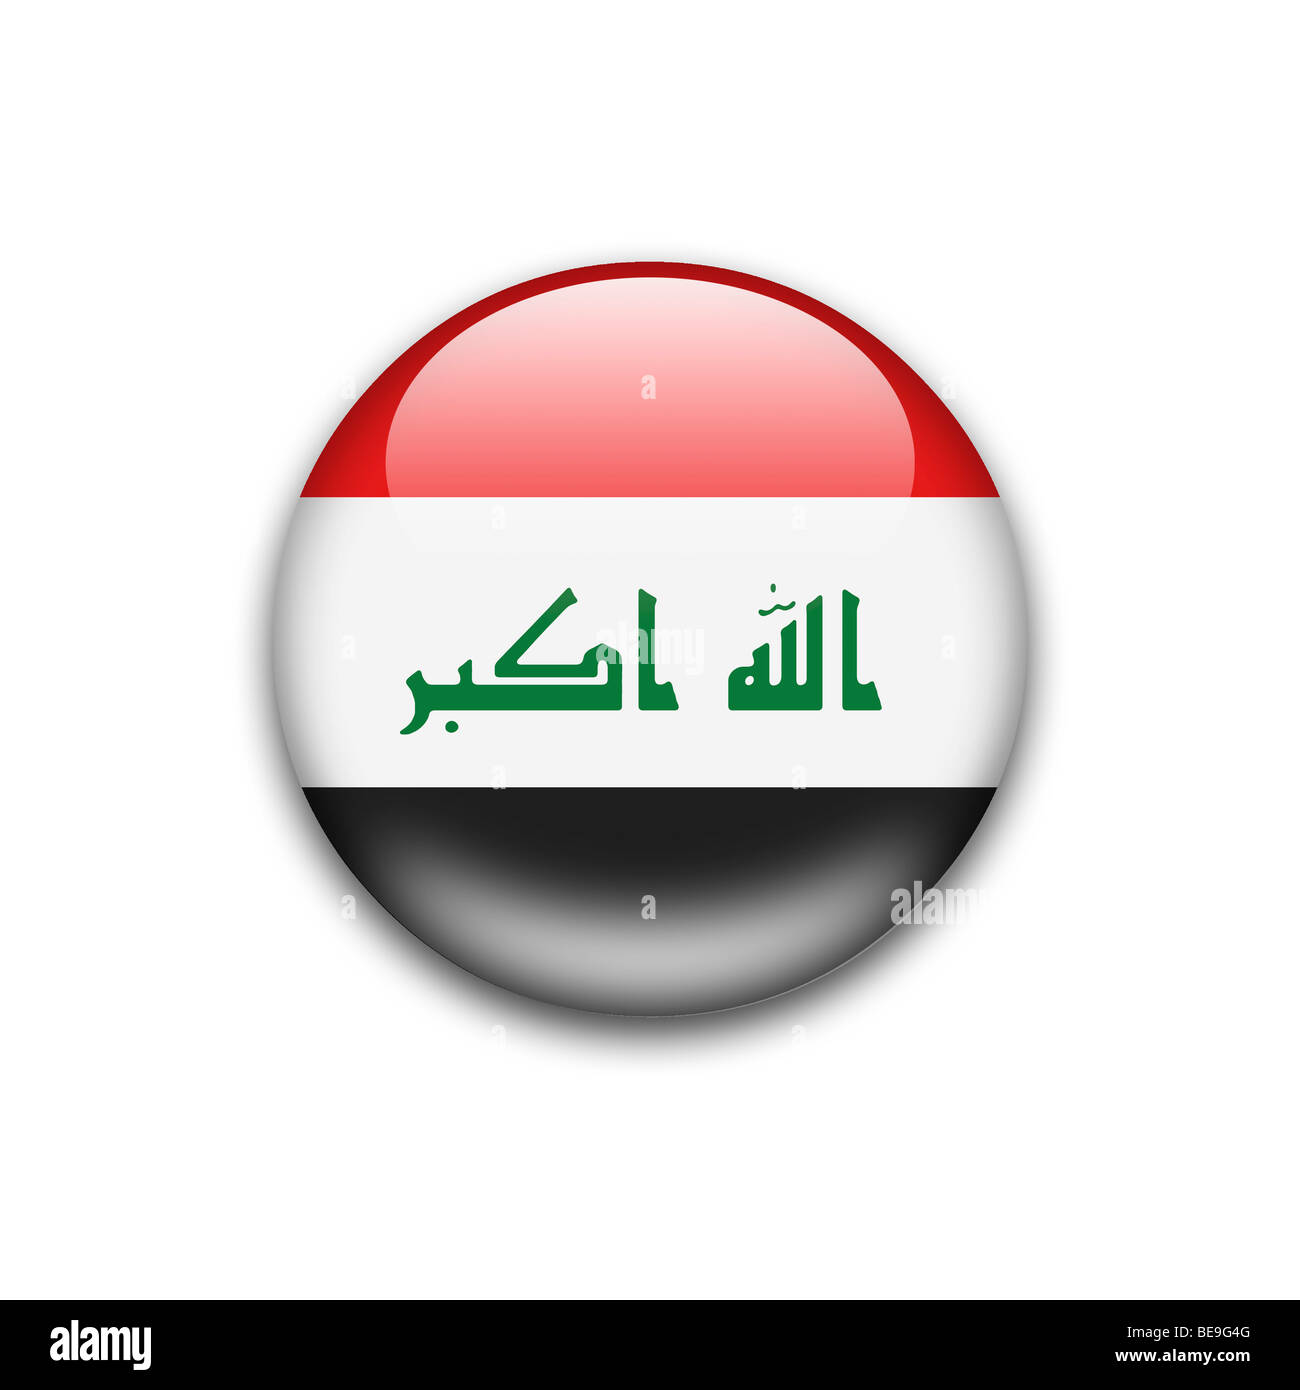 Iraq flag Cut Out Stock Images & Pictures - Alamy